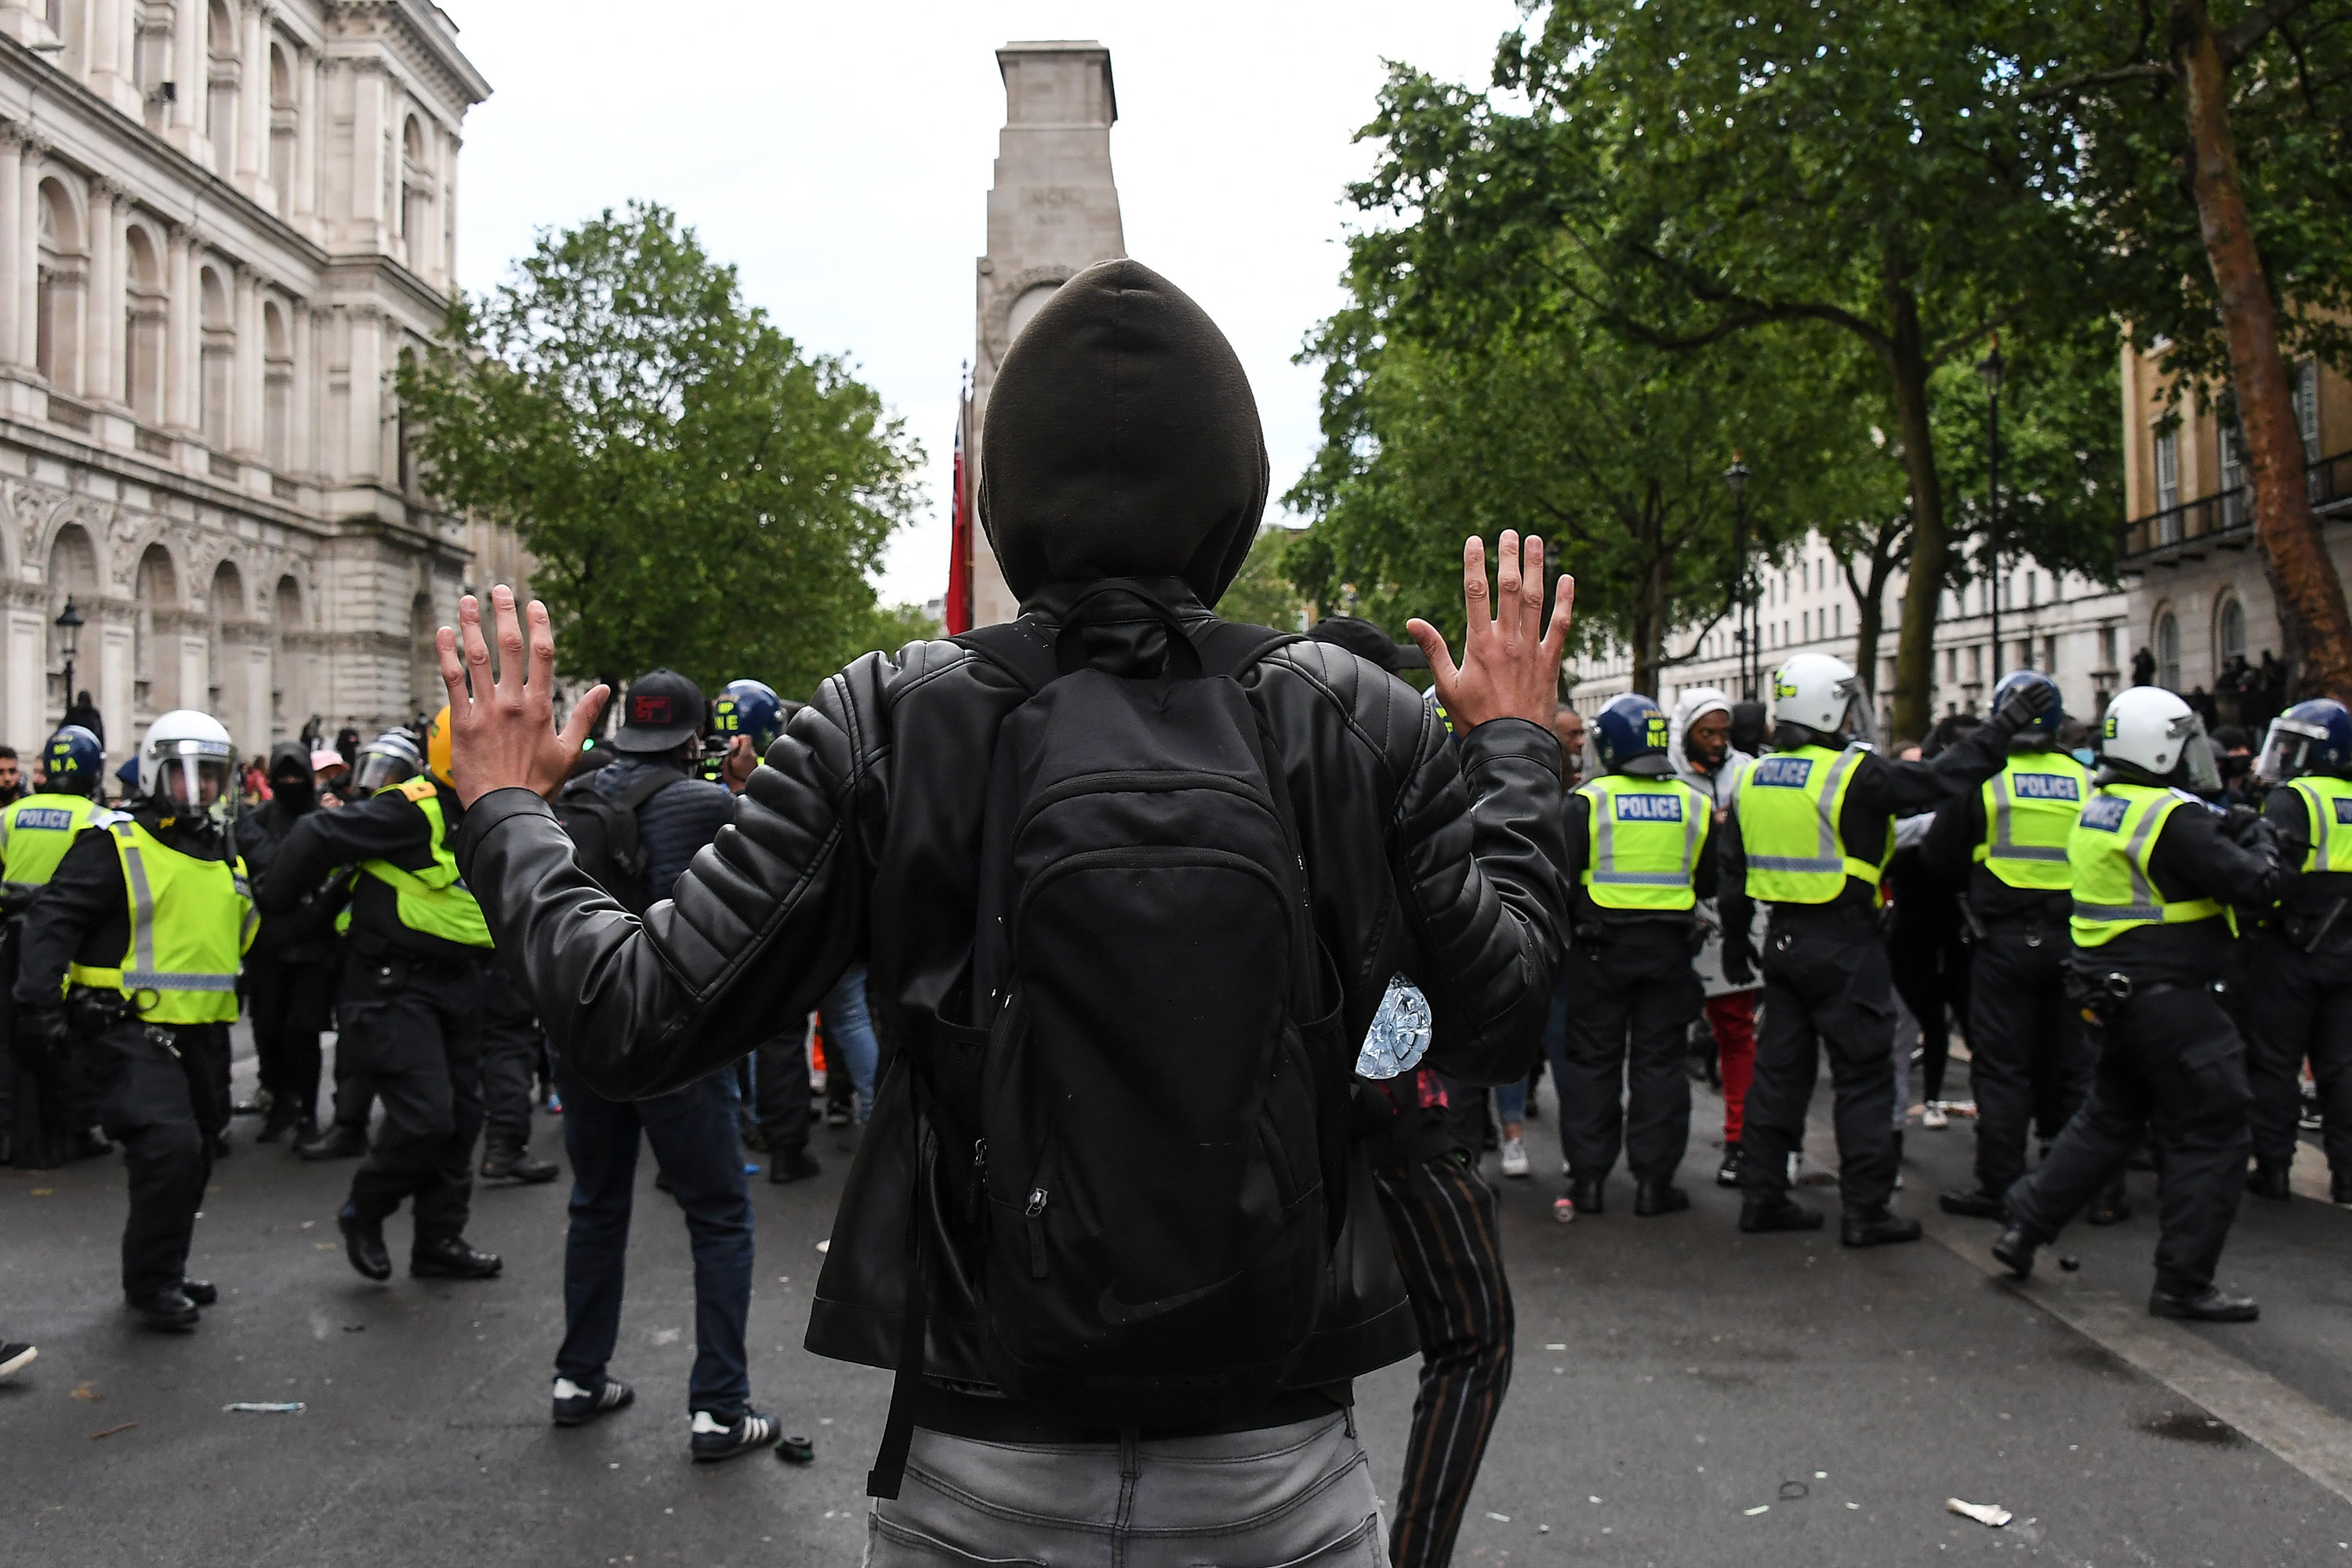 A man raises his hands as police scuffle with demonstrators in London on June 6.